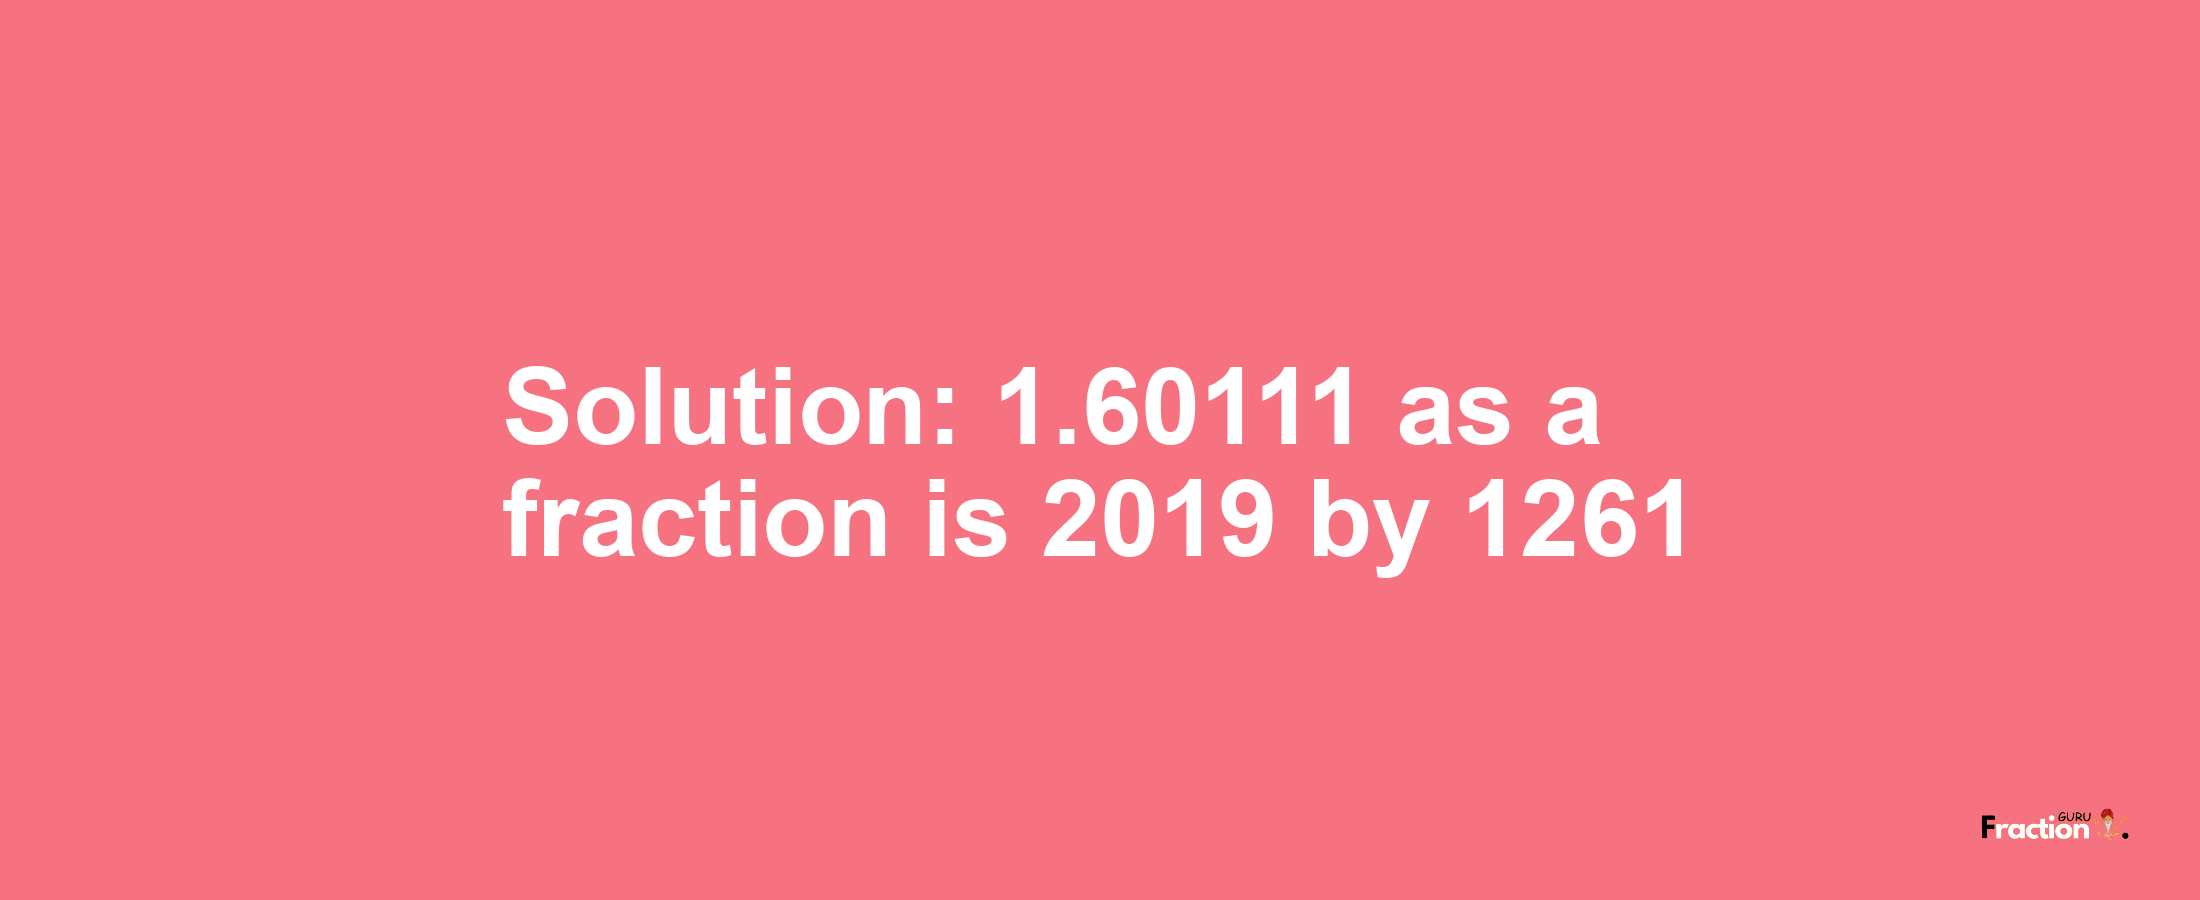 Solution:1.60111 as a fraction is 2019/1261